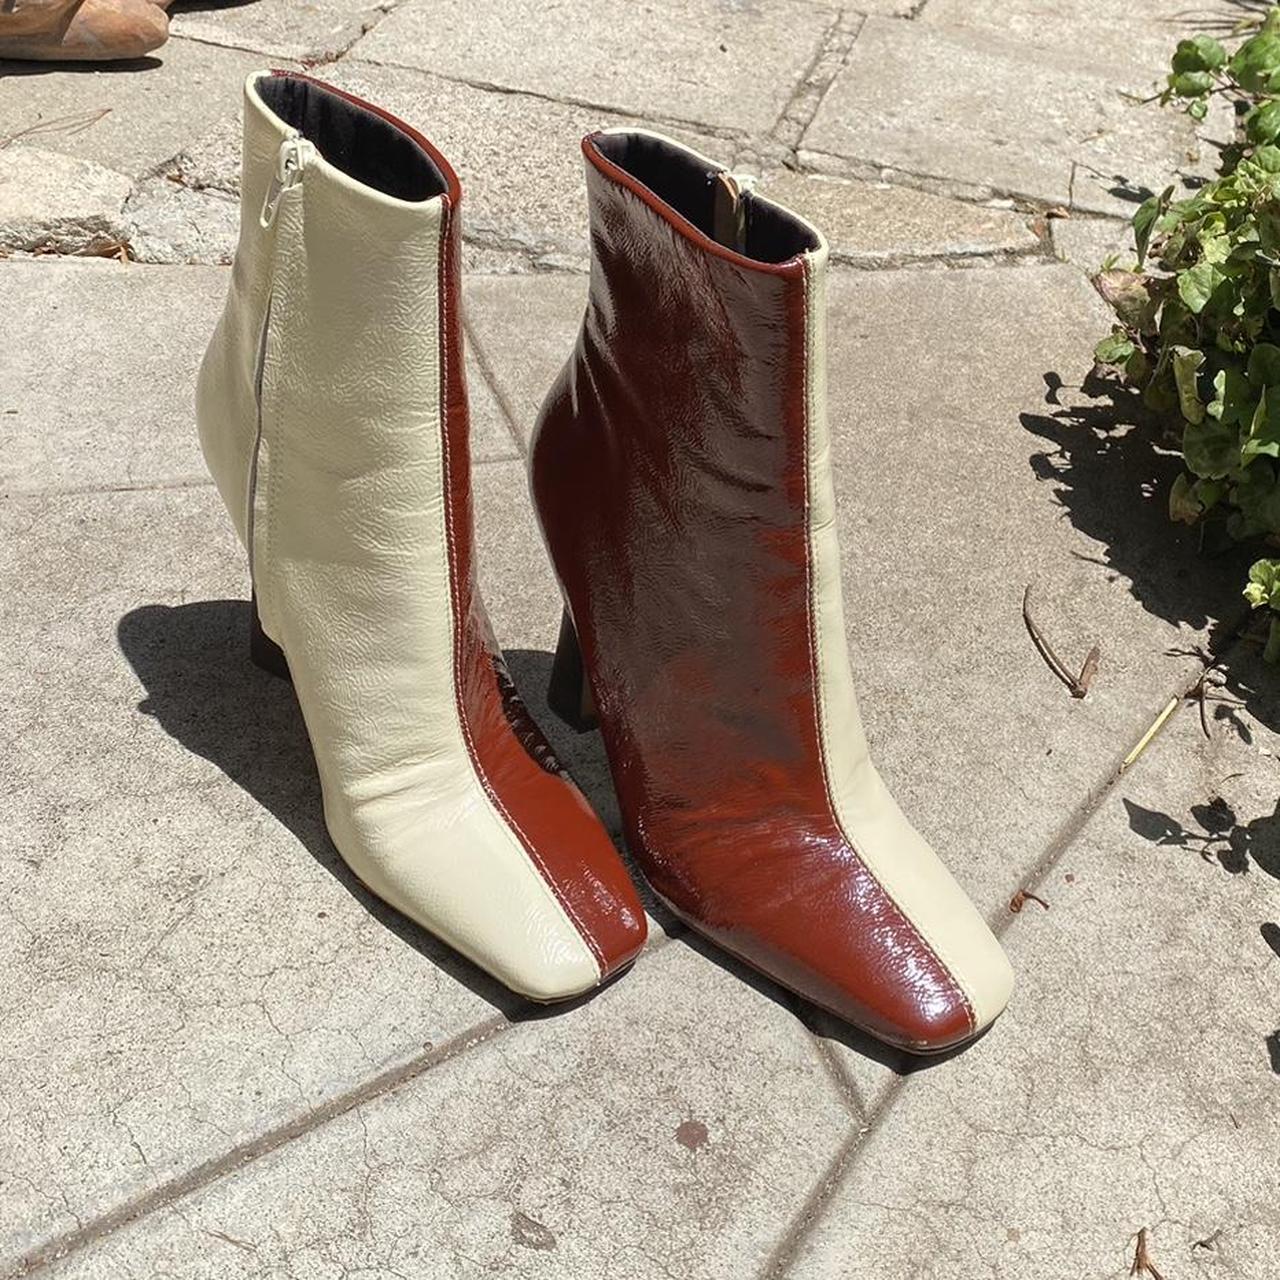 ASOS Women's White and Burgundy Boots